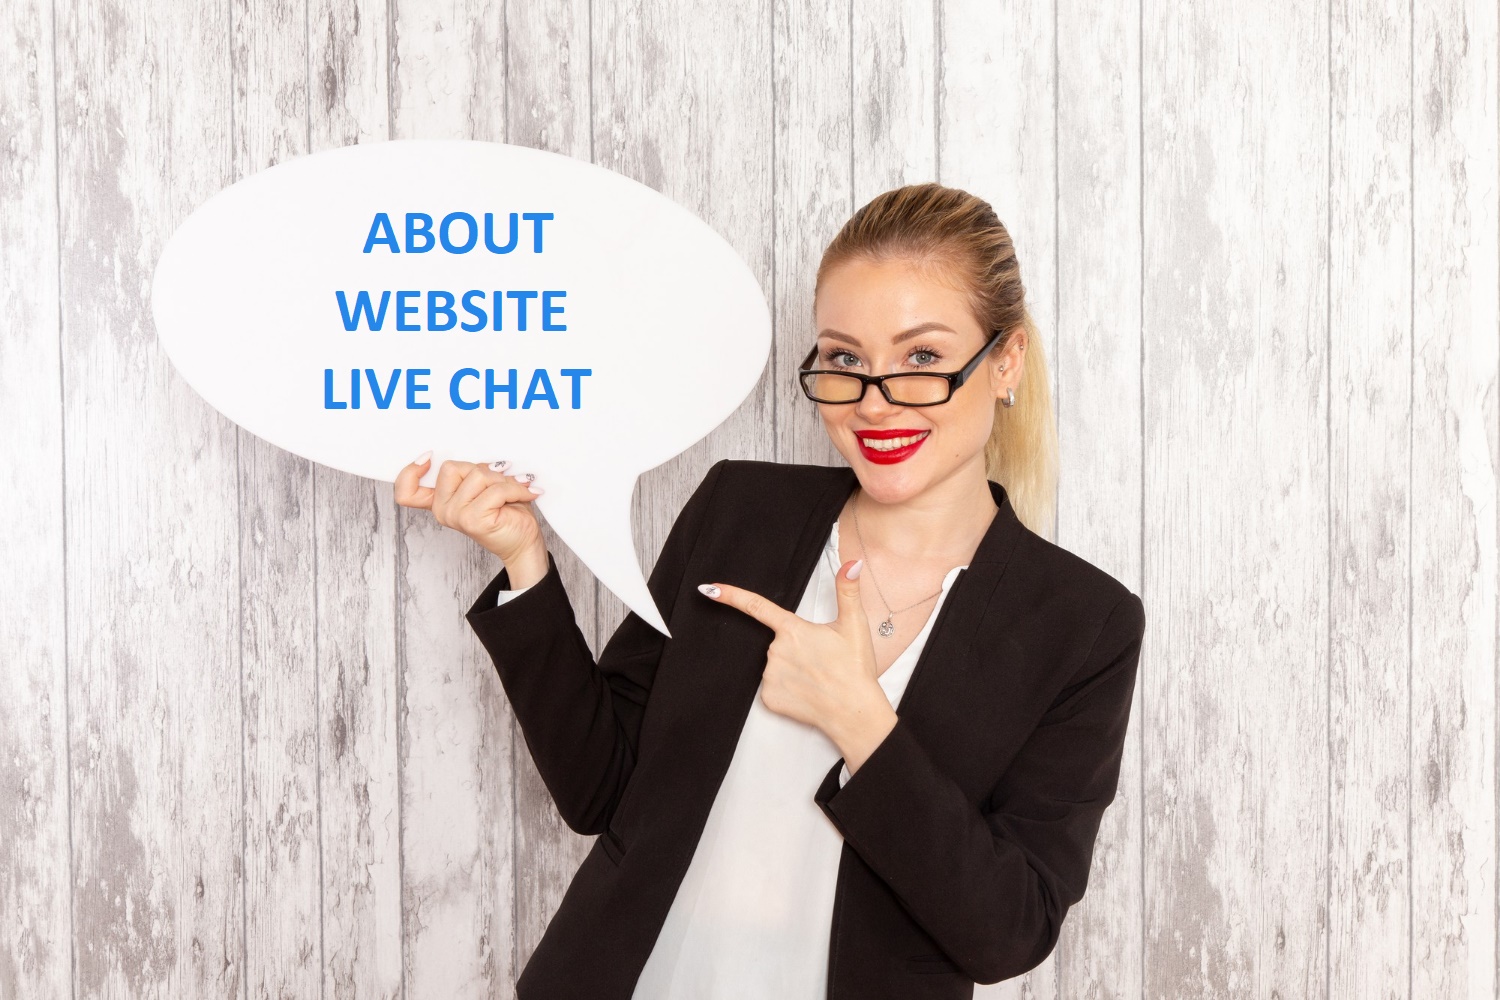 How to successfully provide live chat support on your website.